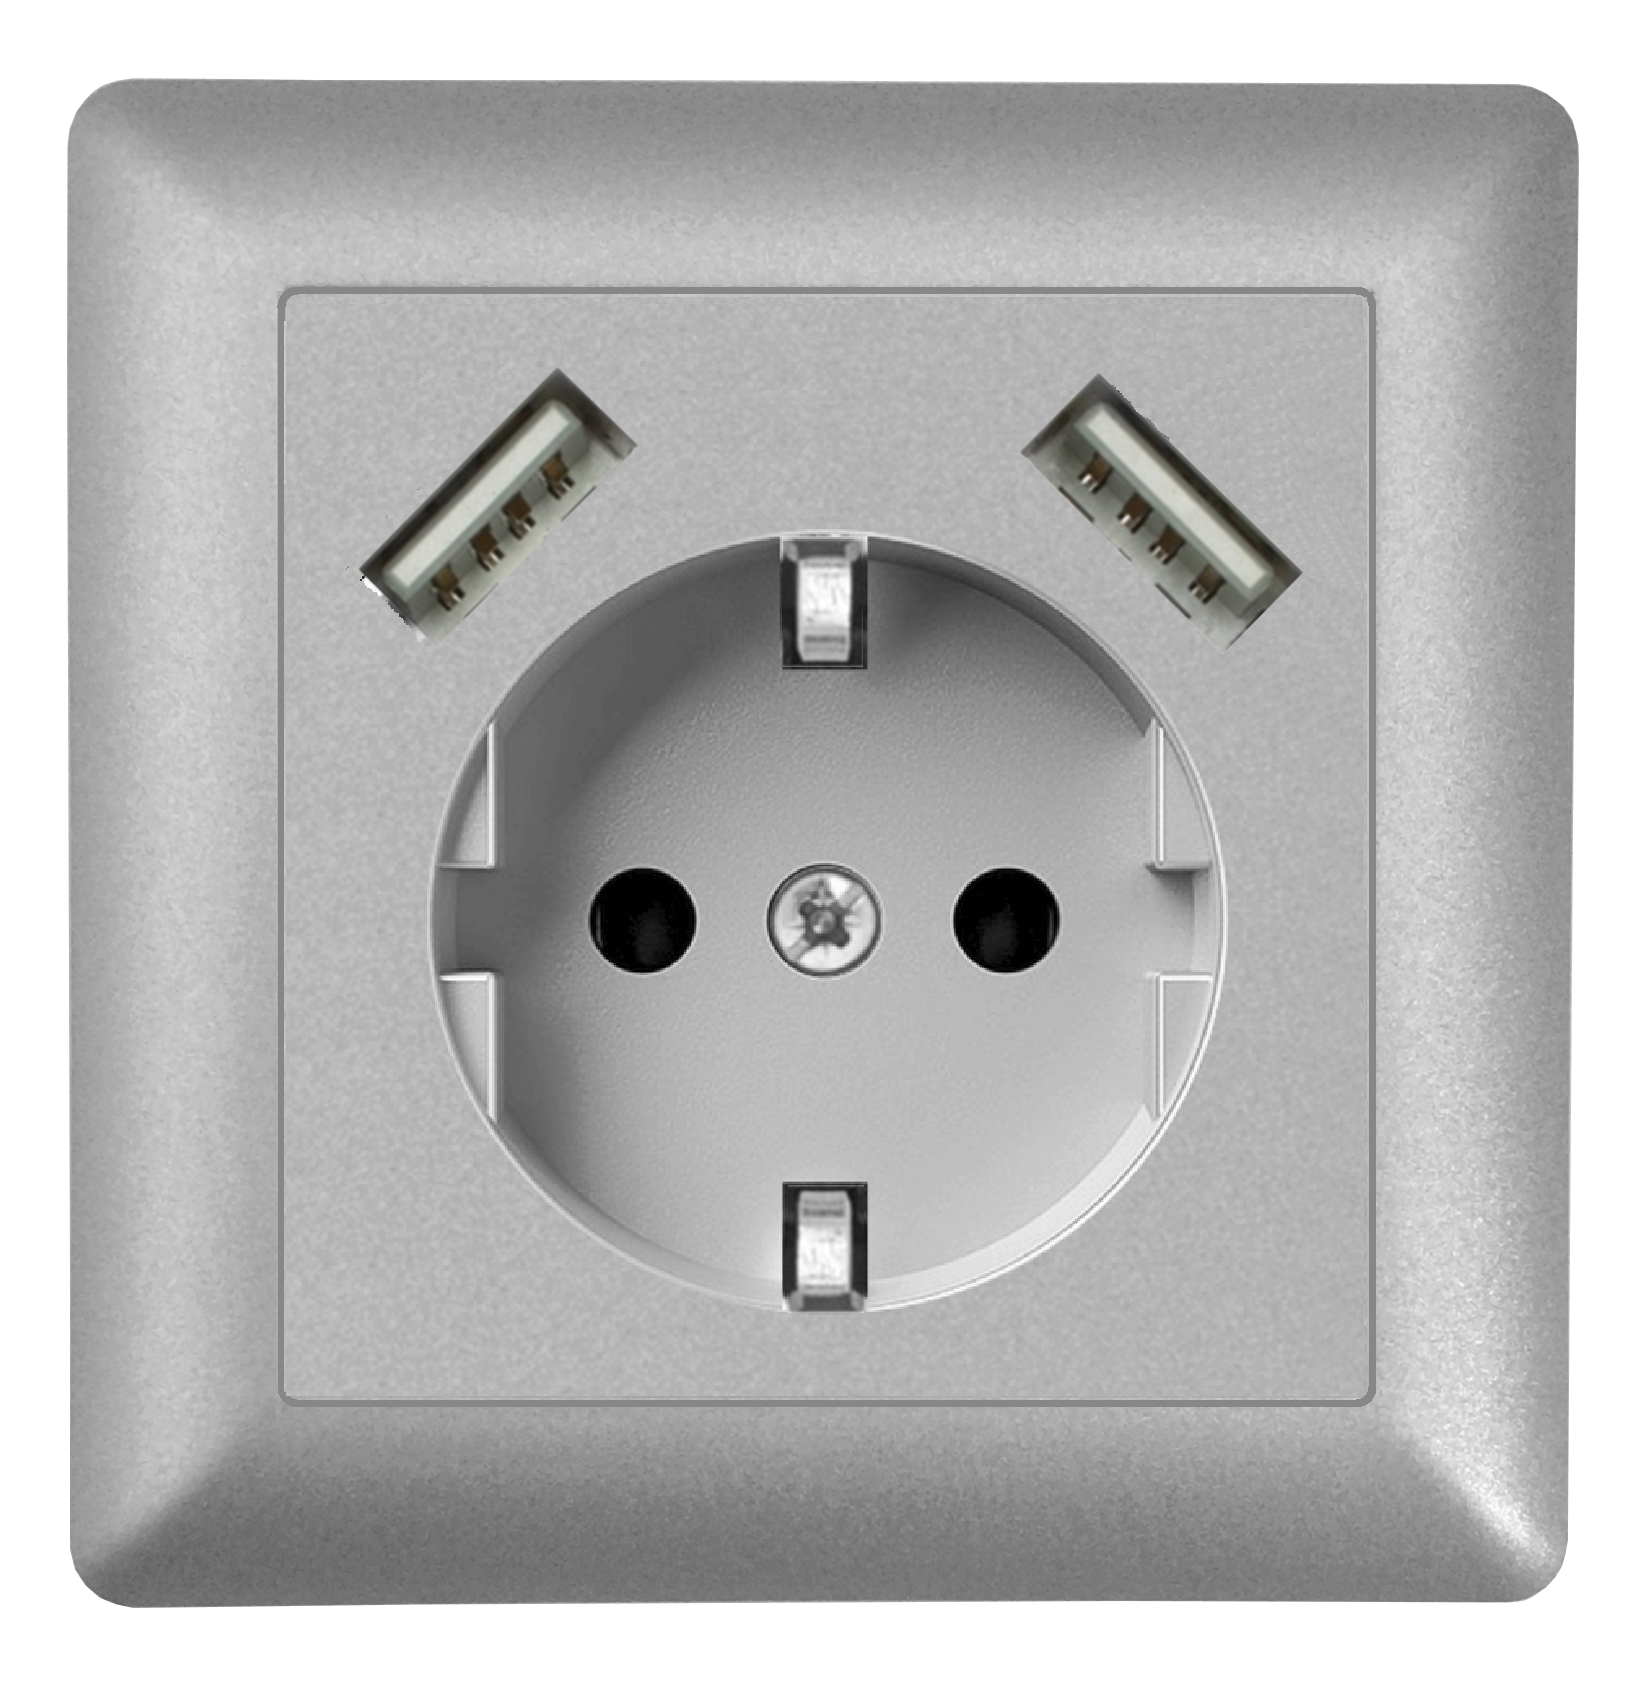 230V USB socket, suitable for Gira system 55, JUNG AS 500, much more,  silver, al